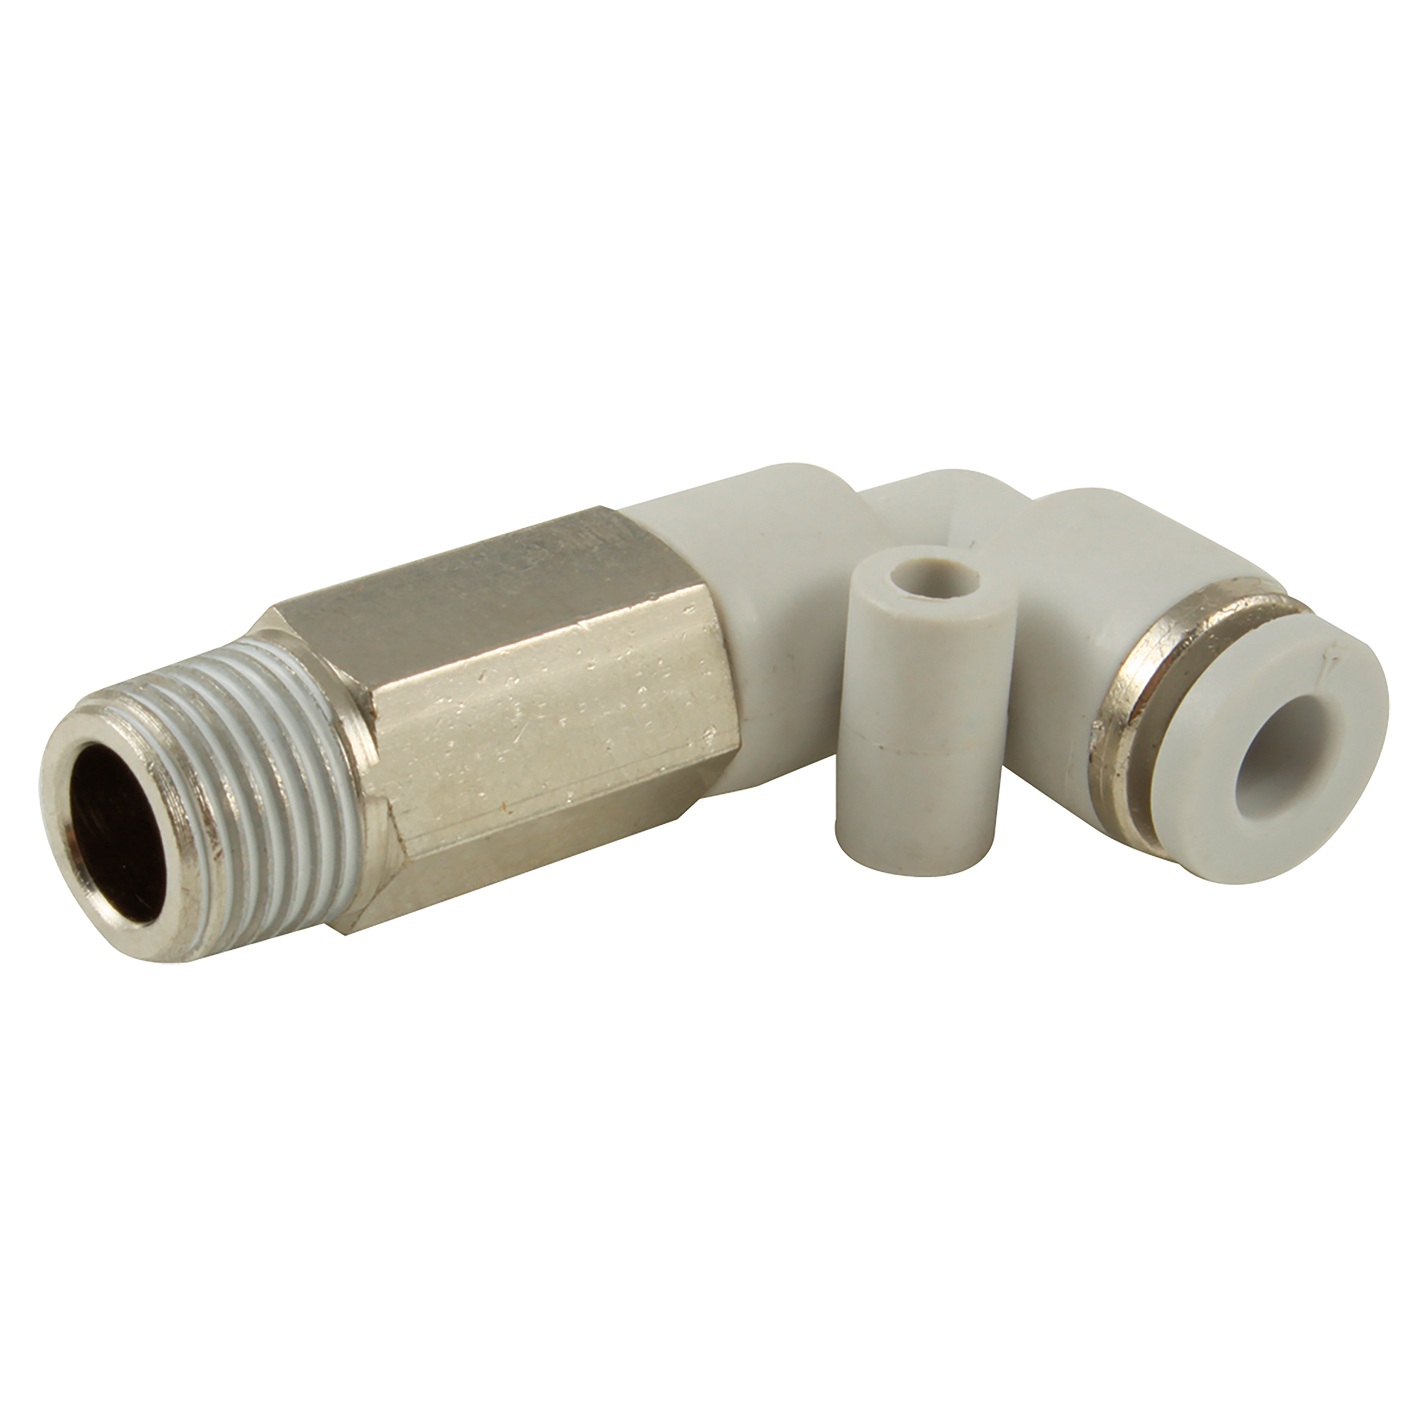 10mm x 3/8" BSPT Male Stud Elbow Extended